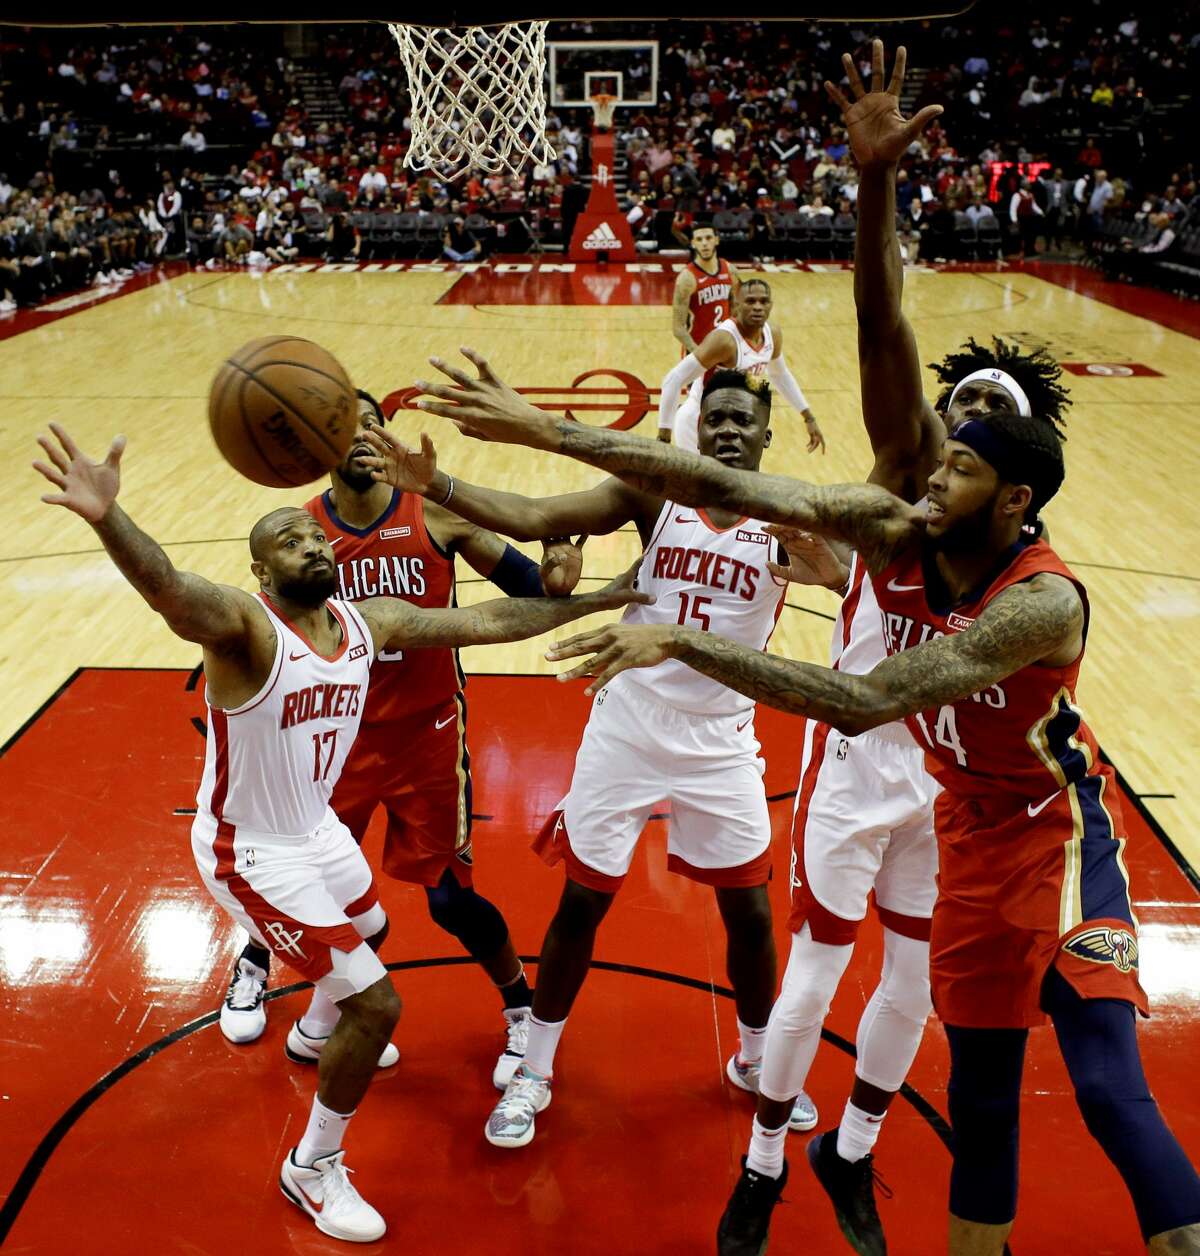 New Orleans Pelicans forward Brandon Ingram, right, passes the ball during the second half of an NBA basketball game against the Houston Rockets, Saturday, Oct. 26, 2019, in Houston. (AP Photo/Eric Christian Smith)